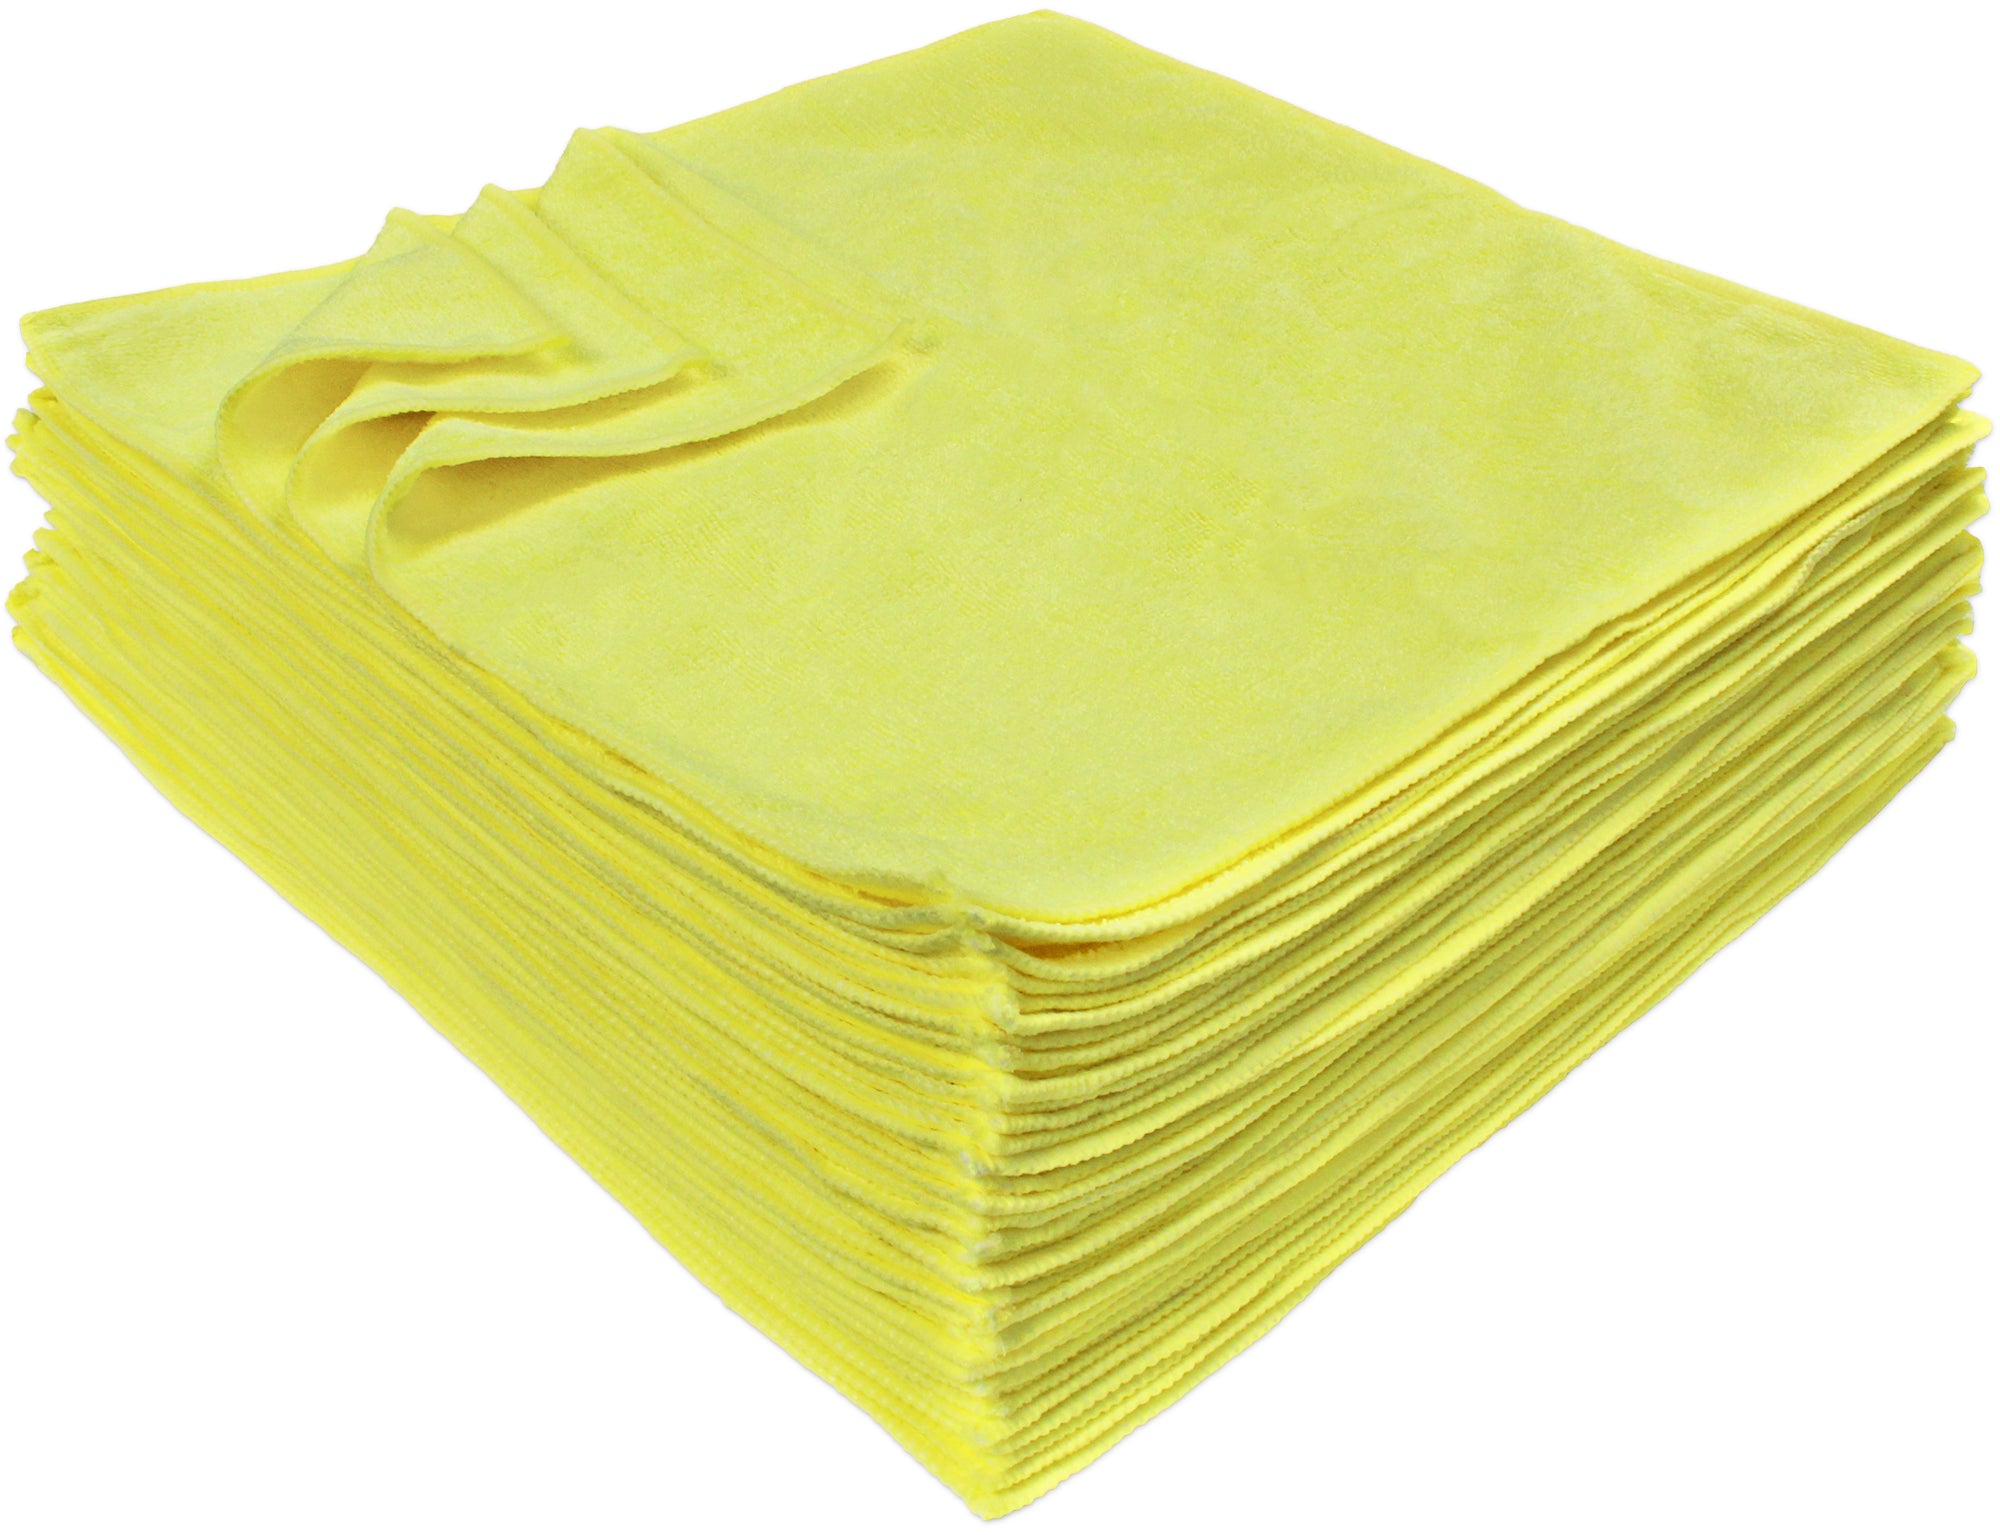 Detailer's Preference® Yellow Microfiber Cleaning Cloths – 36-pack